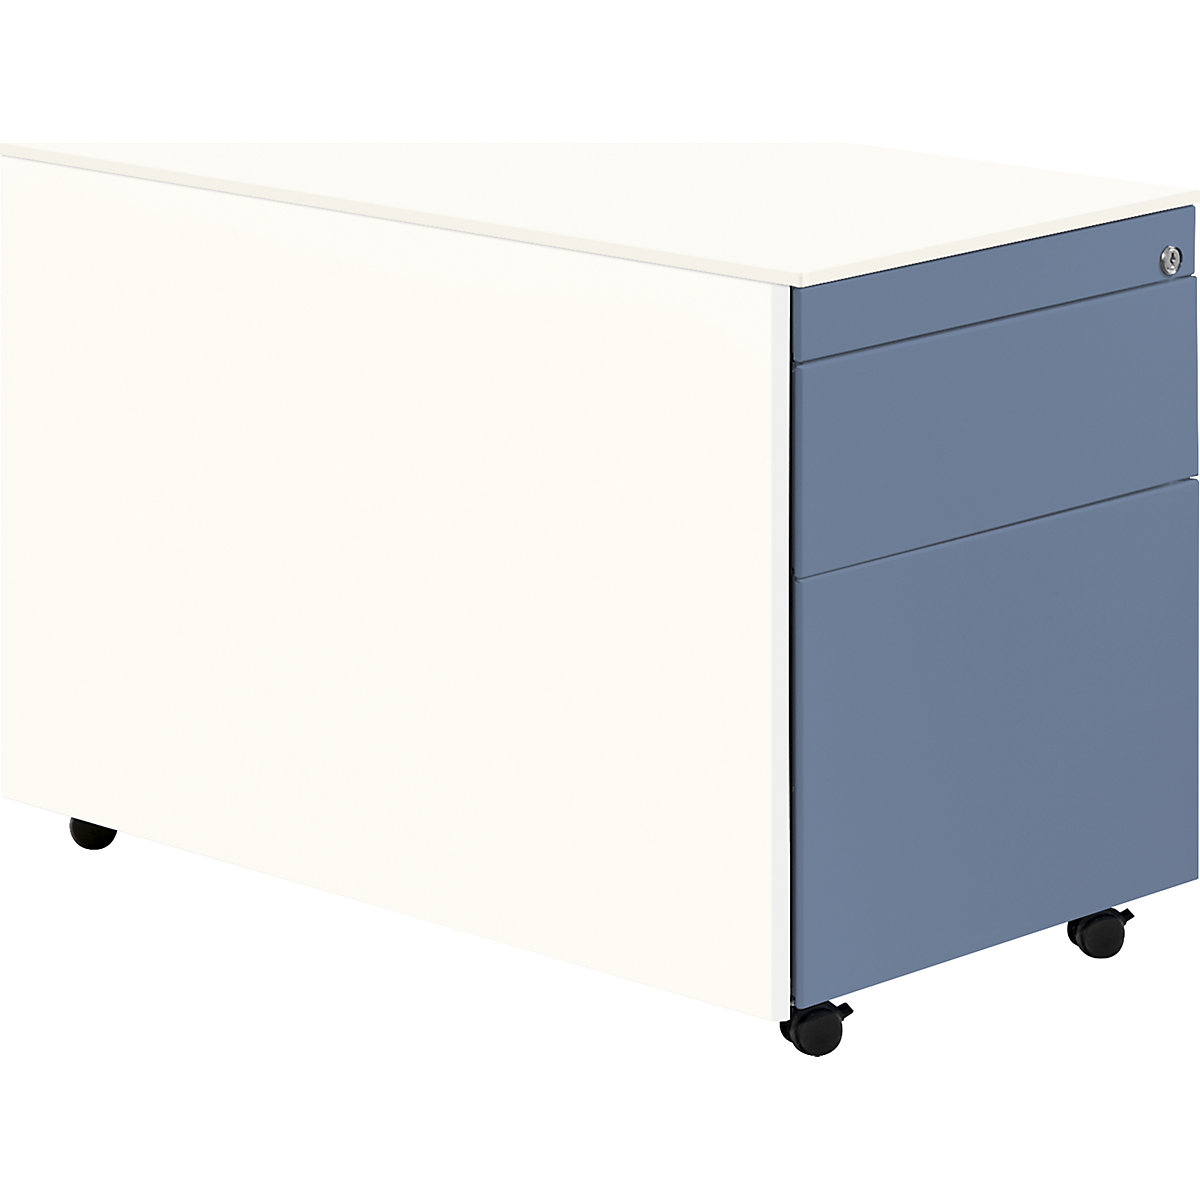 Drawer pedestal with castors – mauser, HxD 570 x 800 mm, 1 drawer, 1 suspension file drawer, pure white / pigeon blue / pure white-3